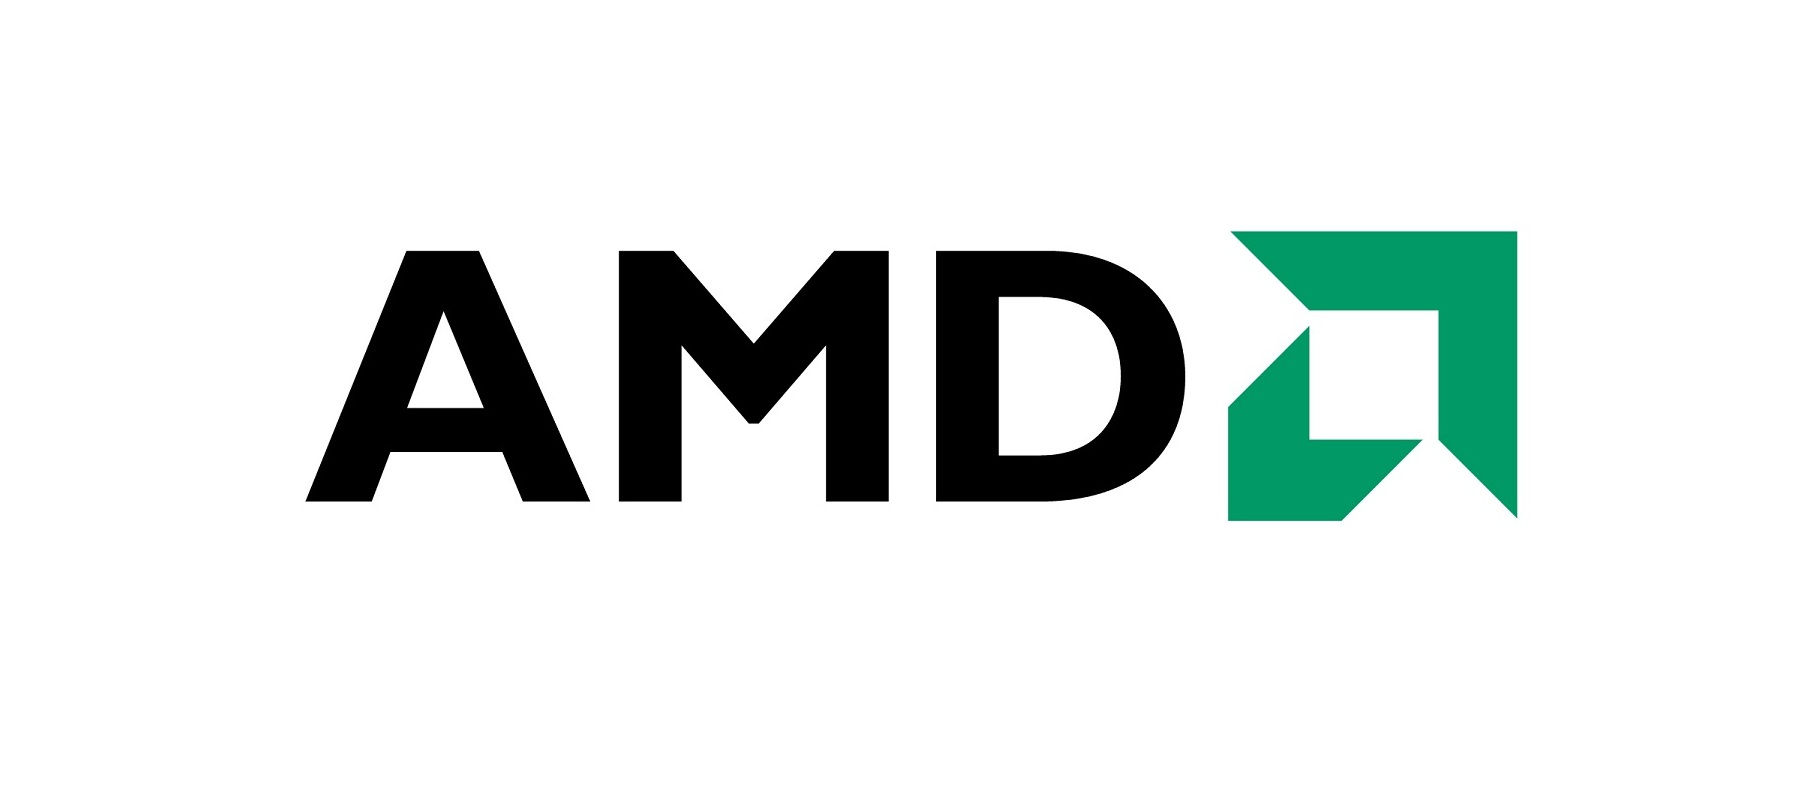 AMD Reports $403 Million Net Loss, Plans Increase in R&D Spending in 2015